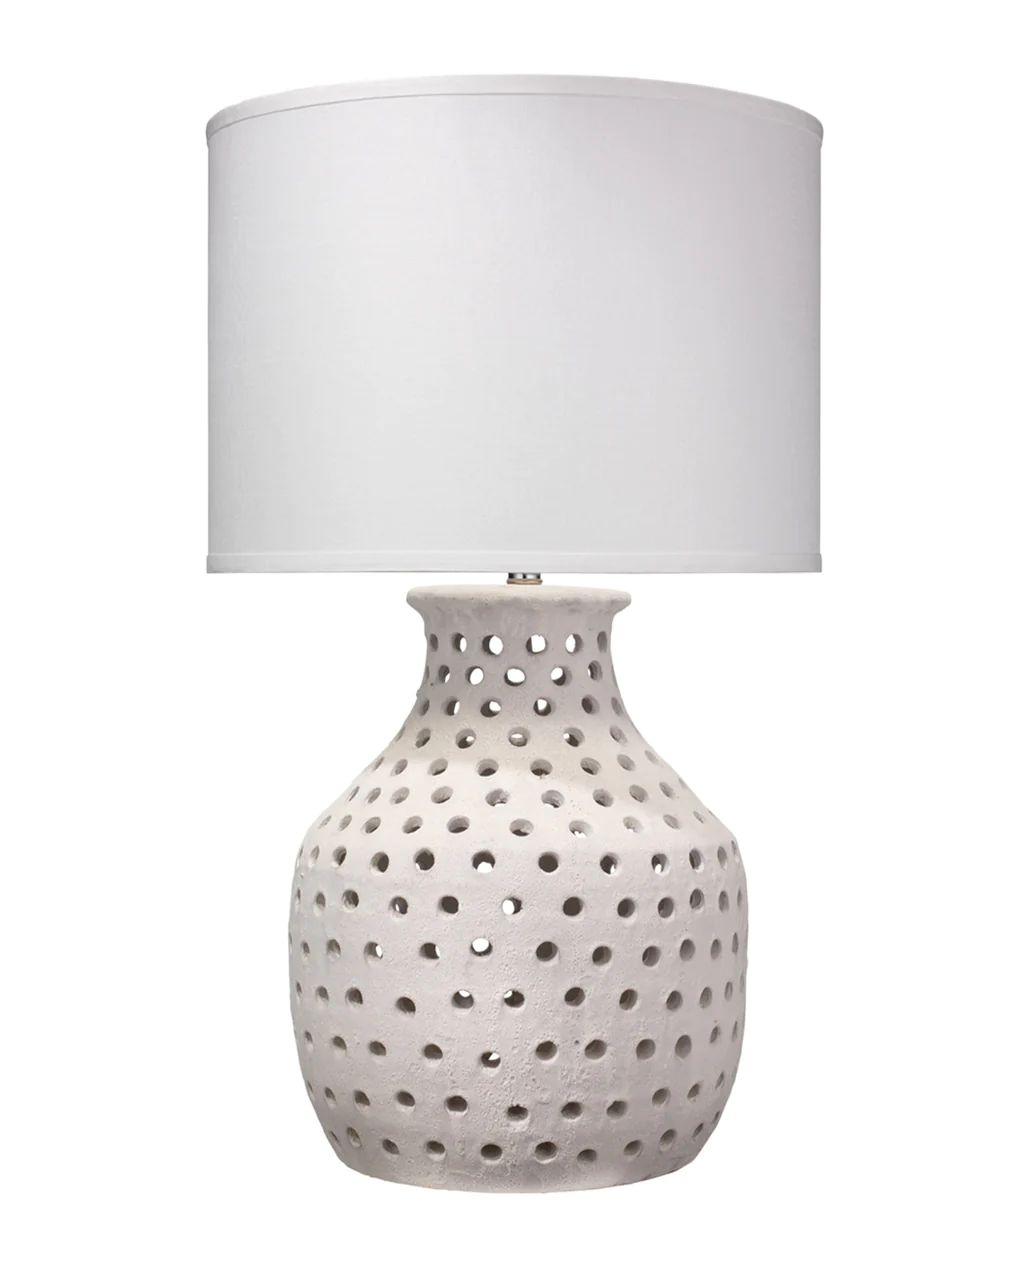 Porous Table Lamp | McGee & Co.